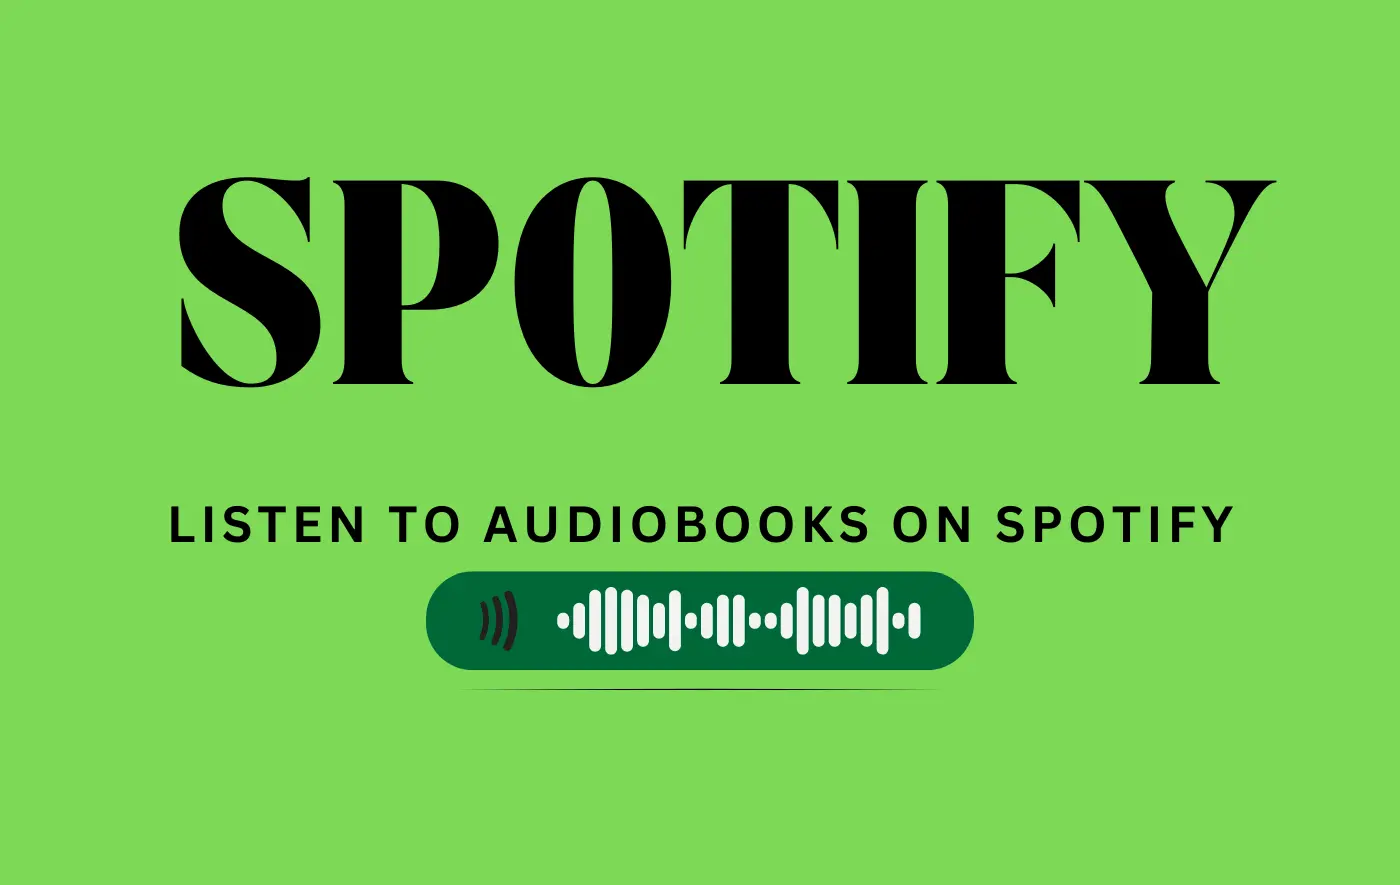 How to Listen to Audiobooks on Spotify